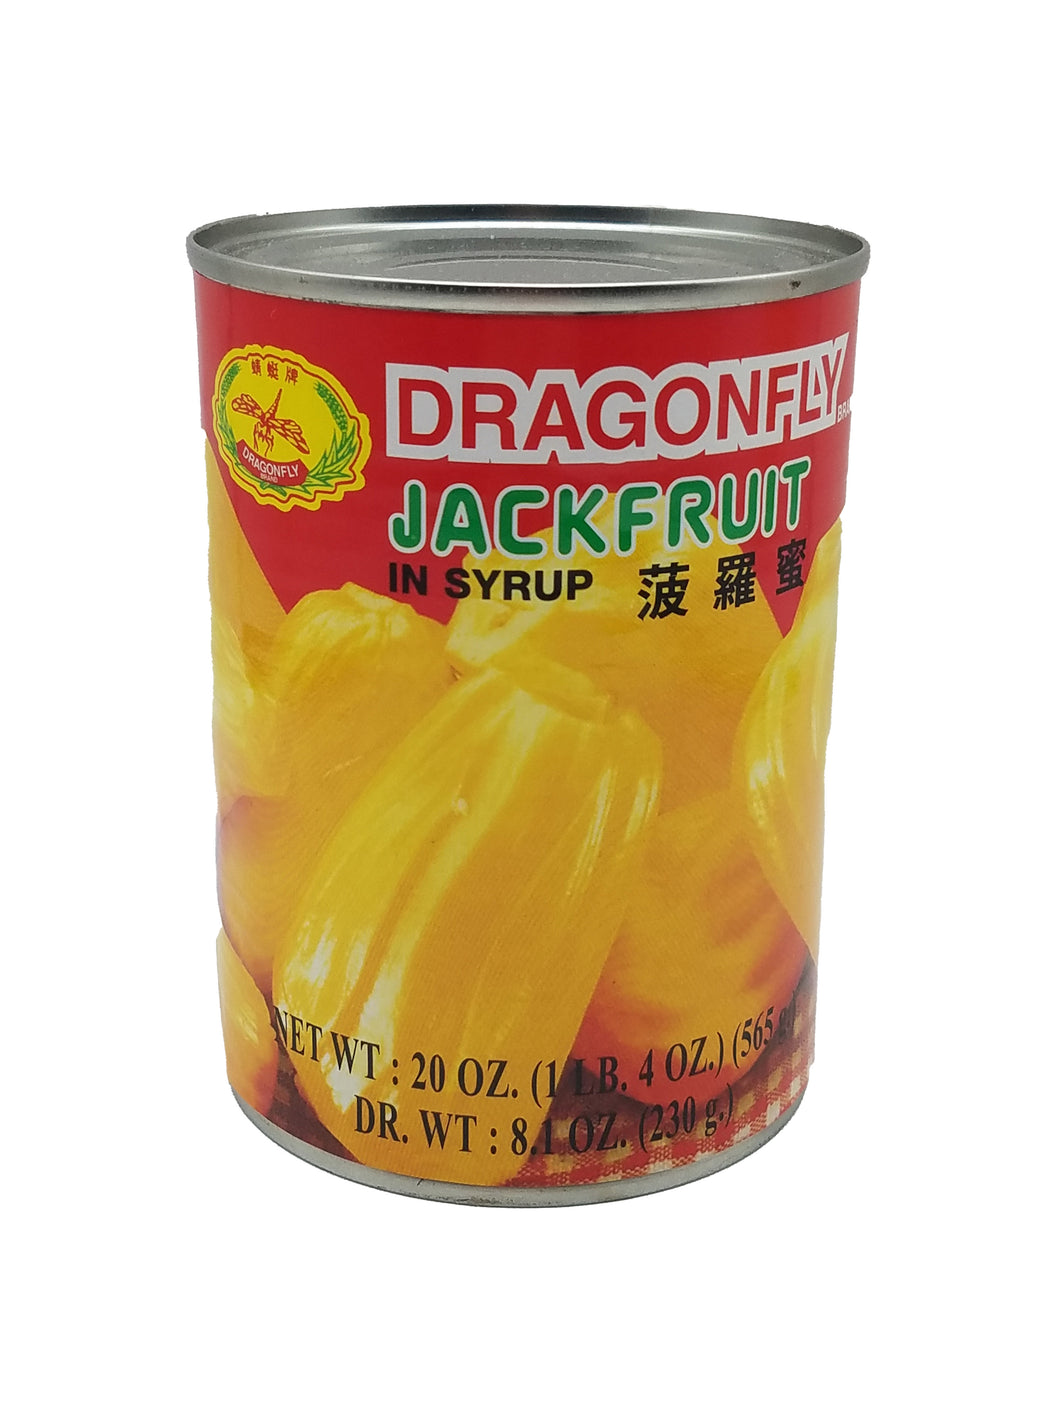 Dragonfly Jackfruit in Syrup